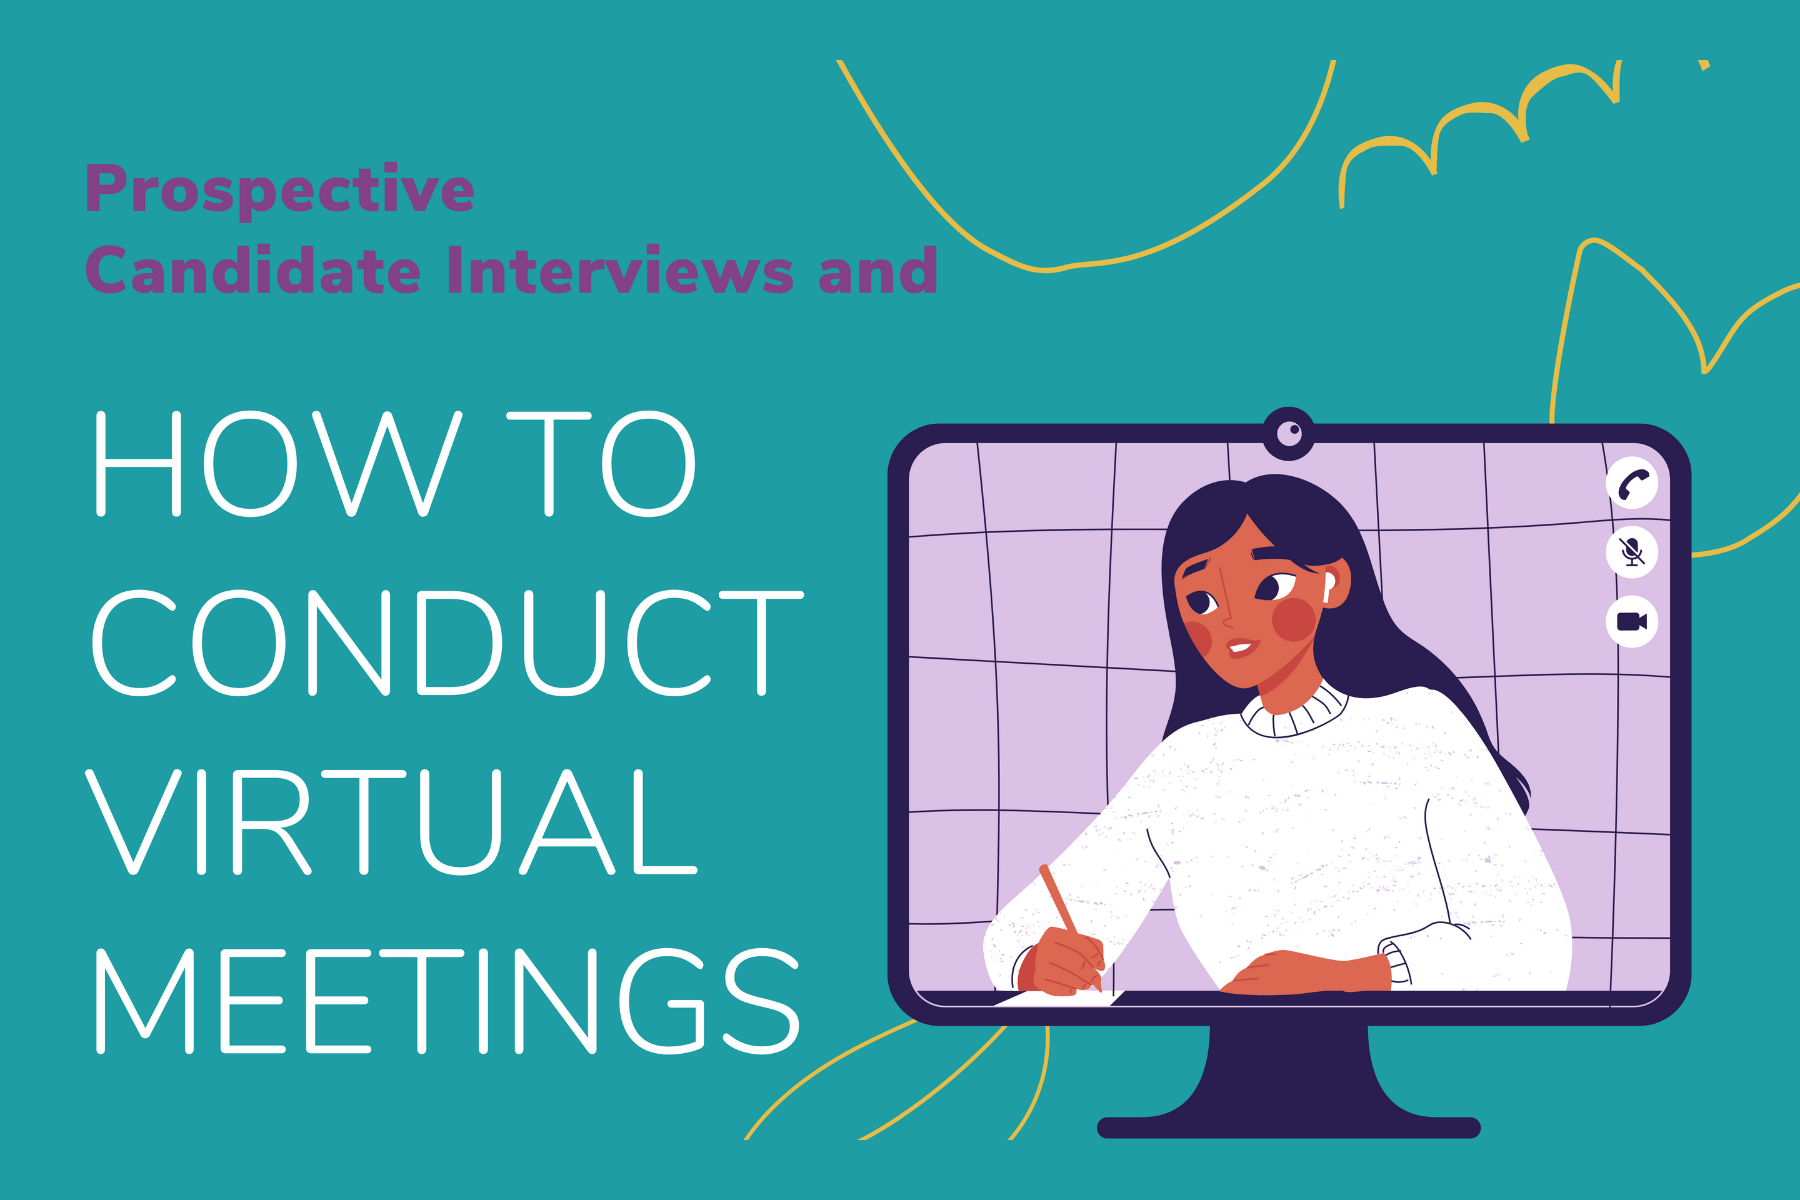 How to Conduct Virtual Meetings